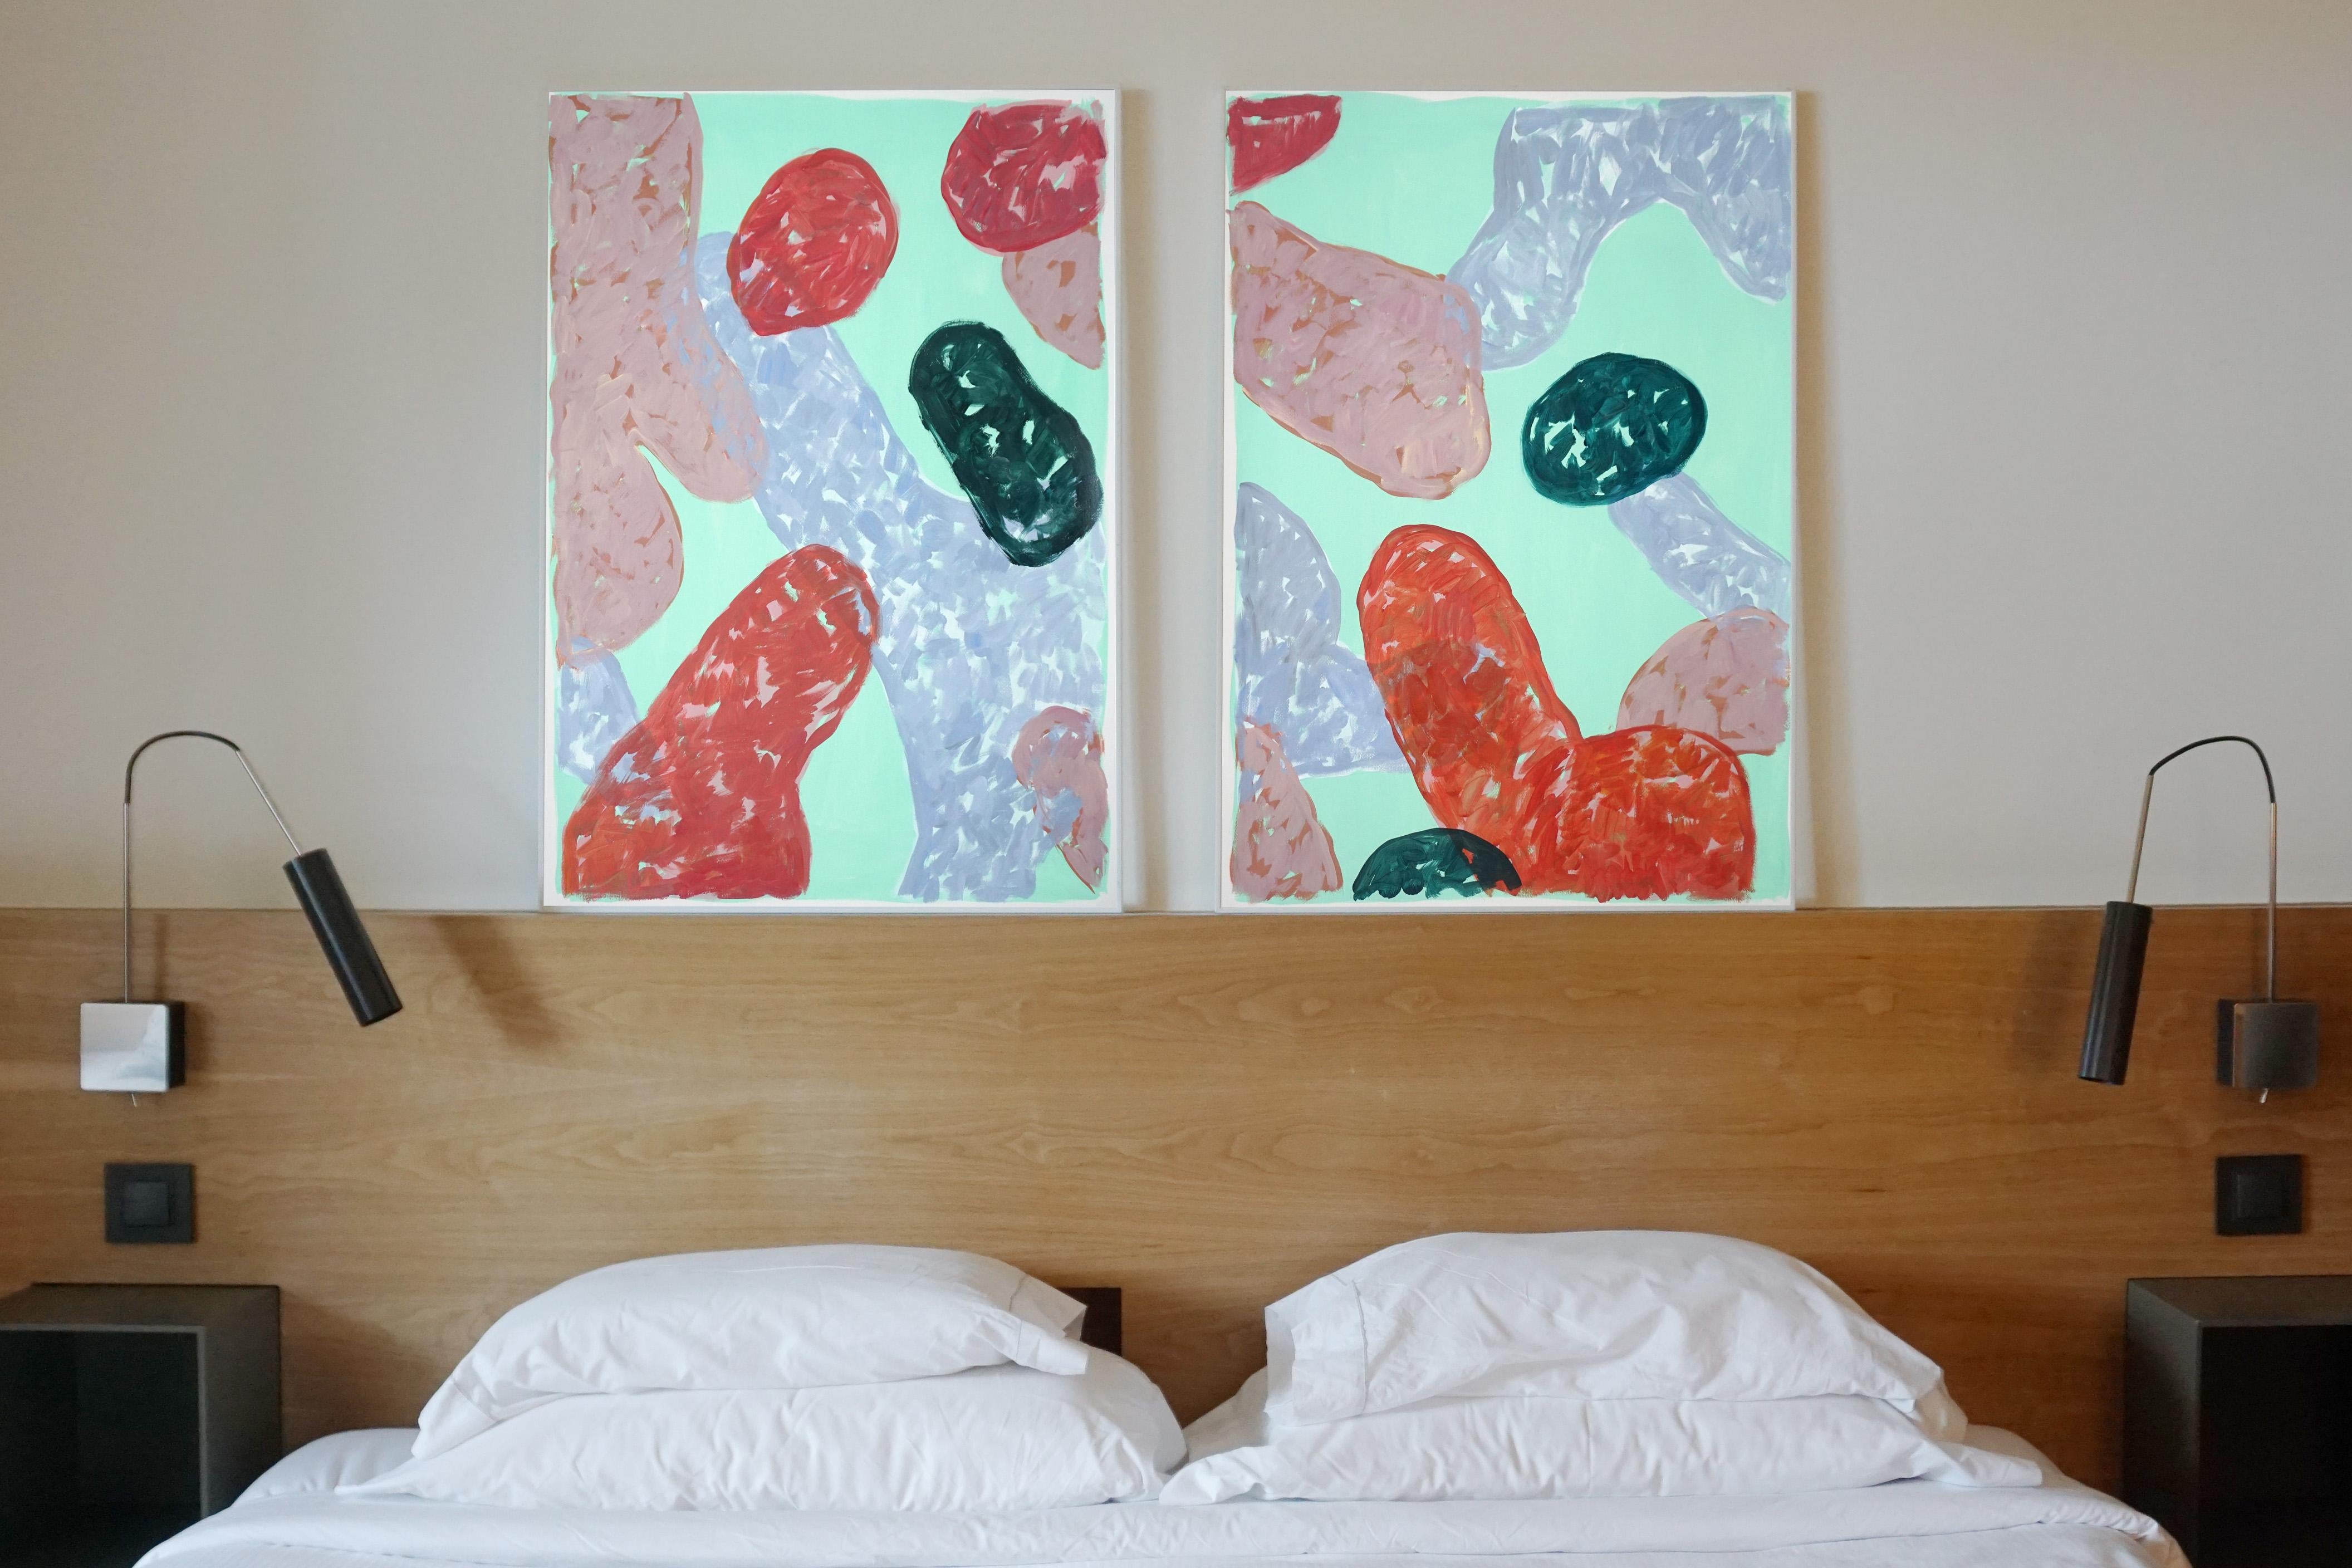 Late Summer Fruit, Cold Green, Pink Large Abstract Diptych, Impressionist Shapes - Painting by Natalia Roman